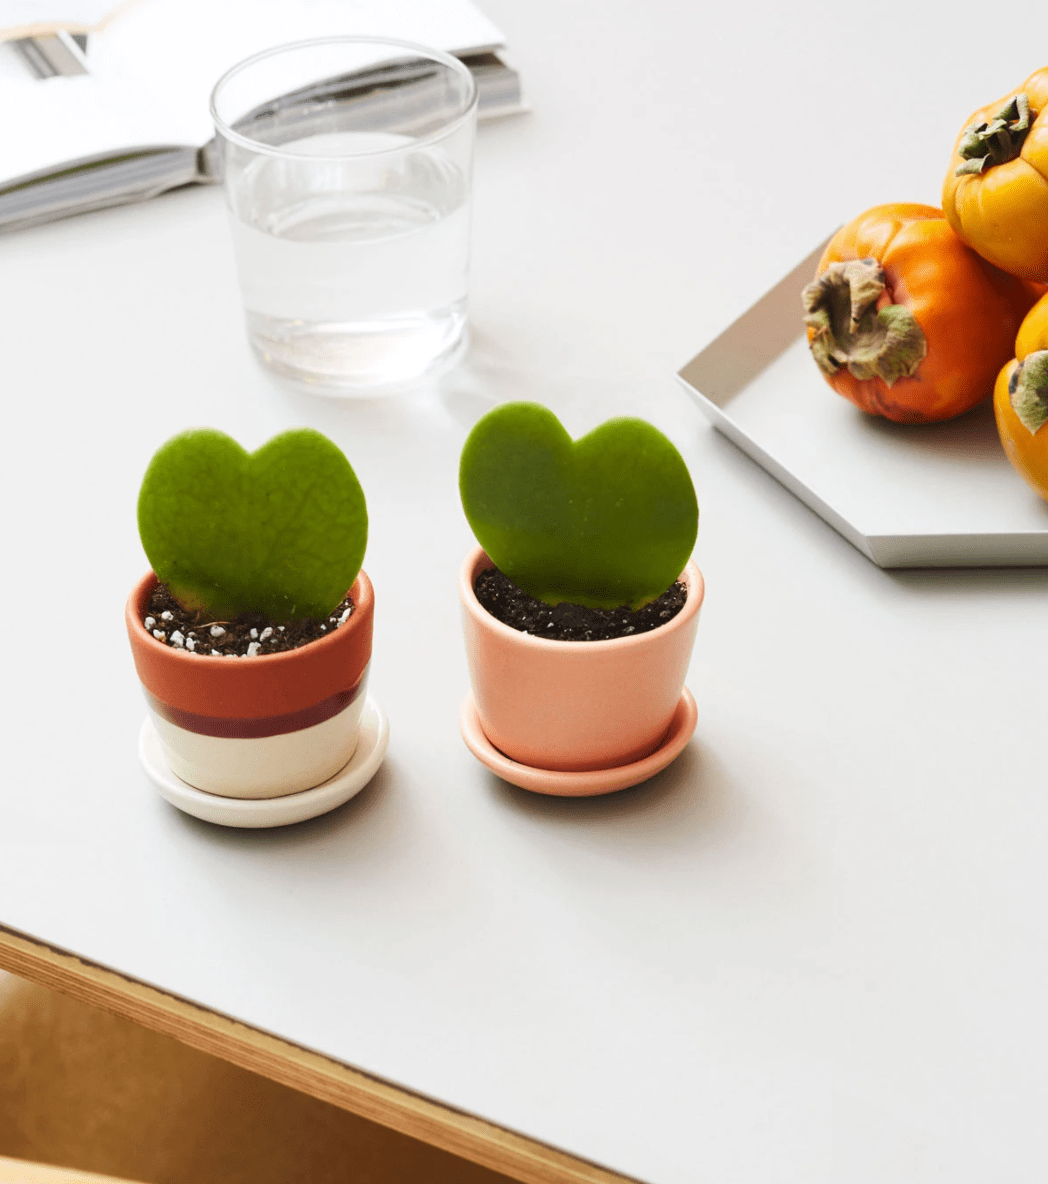 18 Indoor Plant Gifts to Brighten Your Day